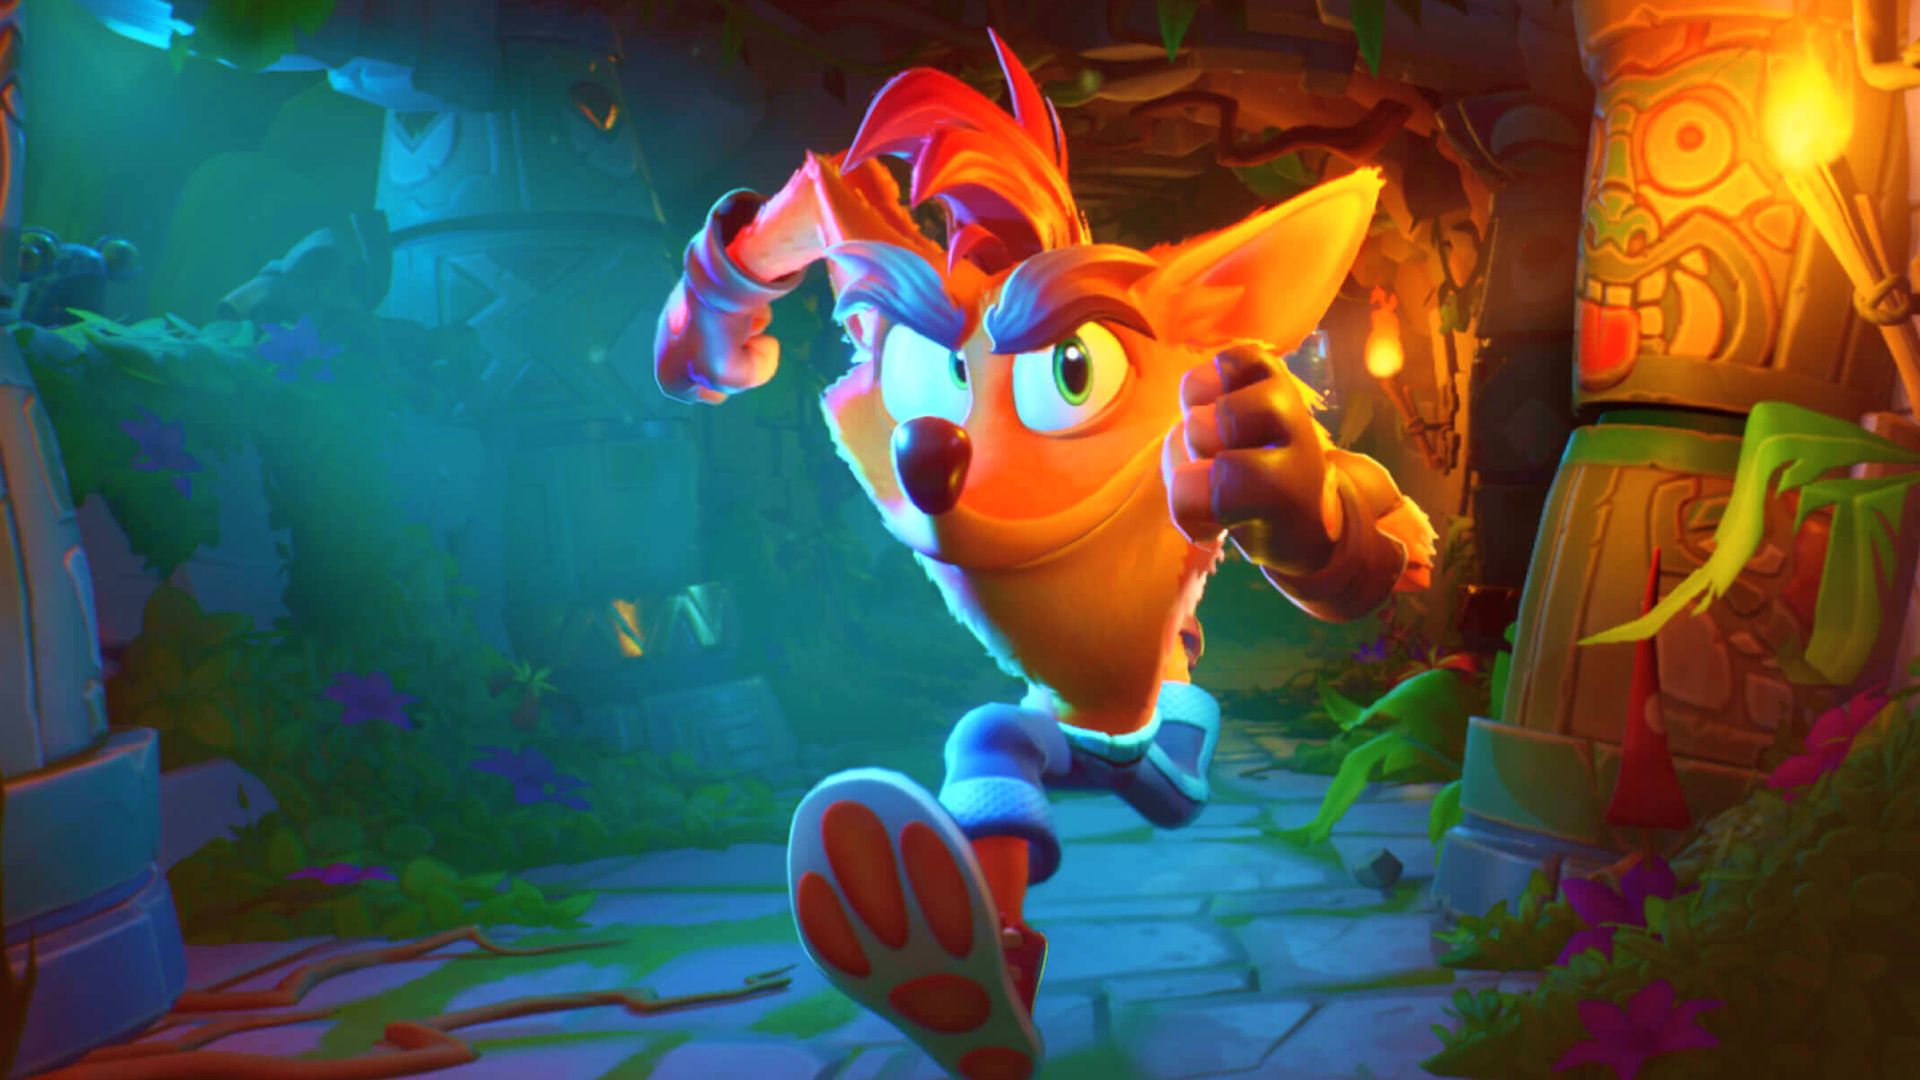 Crash Bandicoot 4: It's About Time officially announced with debut trailer